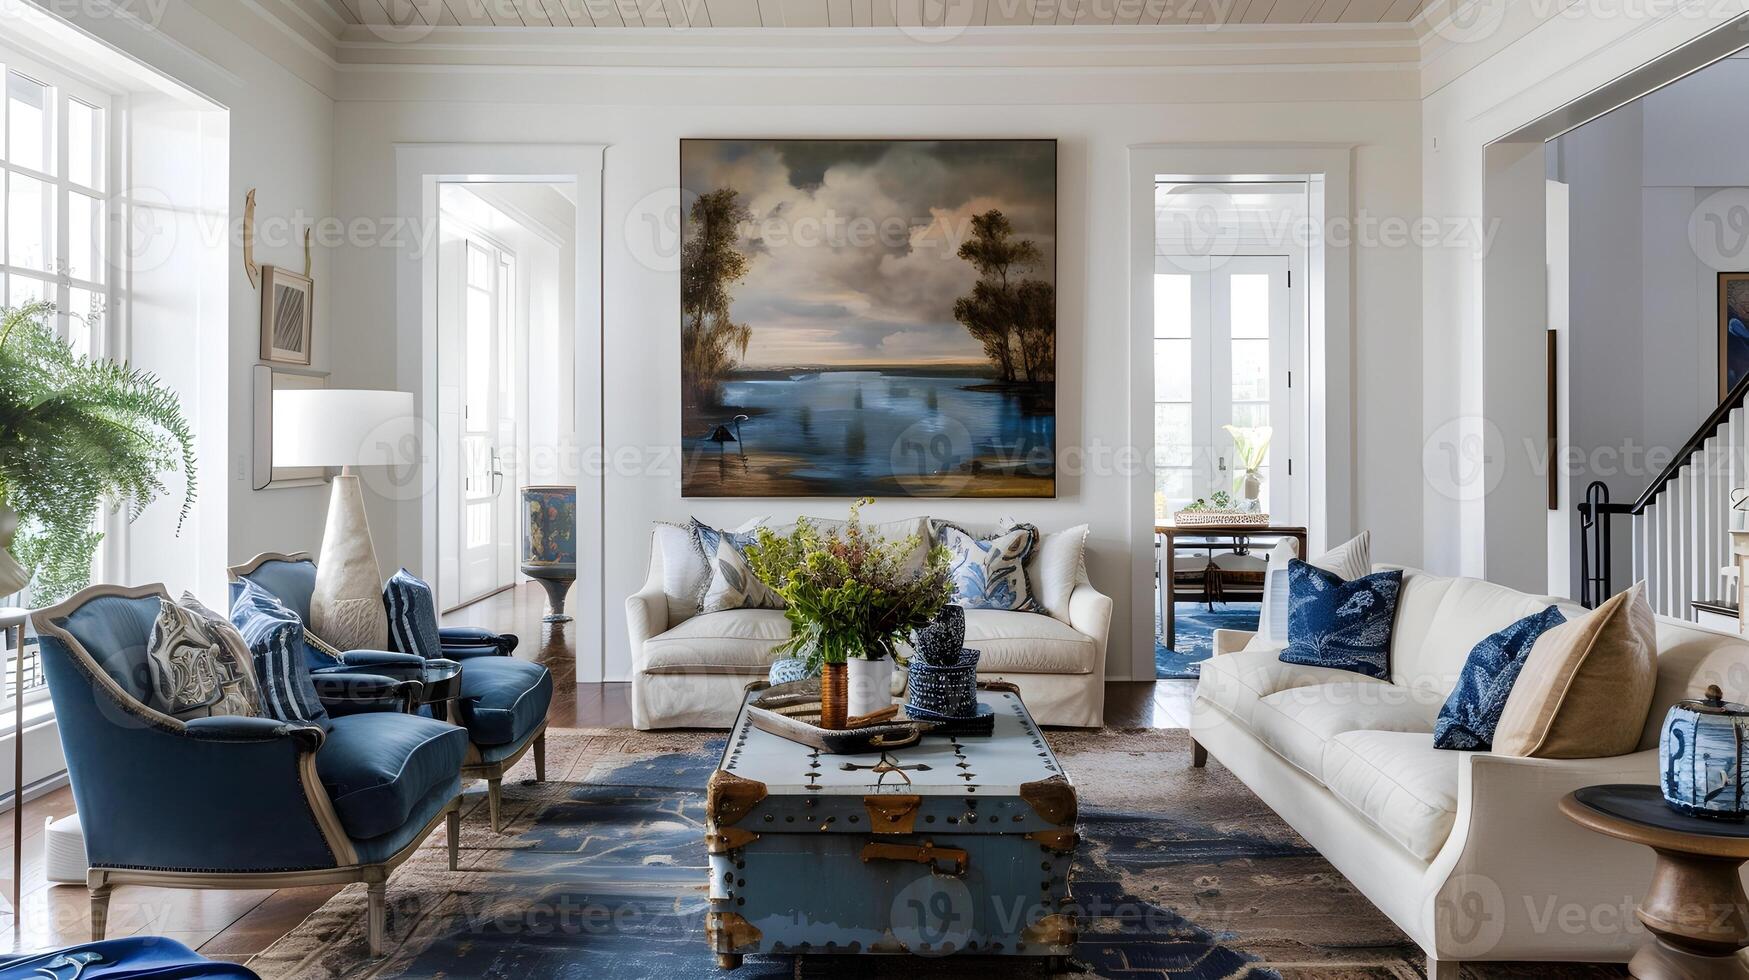 Elegant Coastal Living Room with Blue Accents and a Misty Morning Painting photo